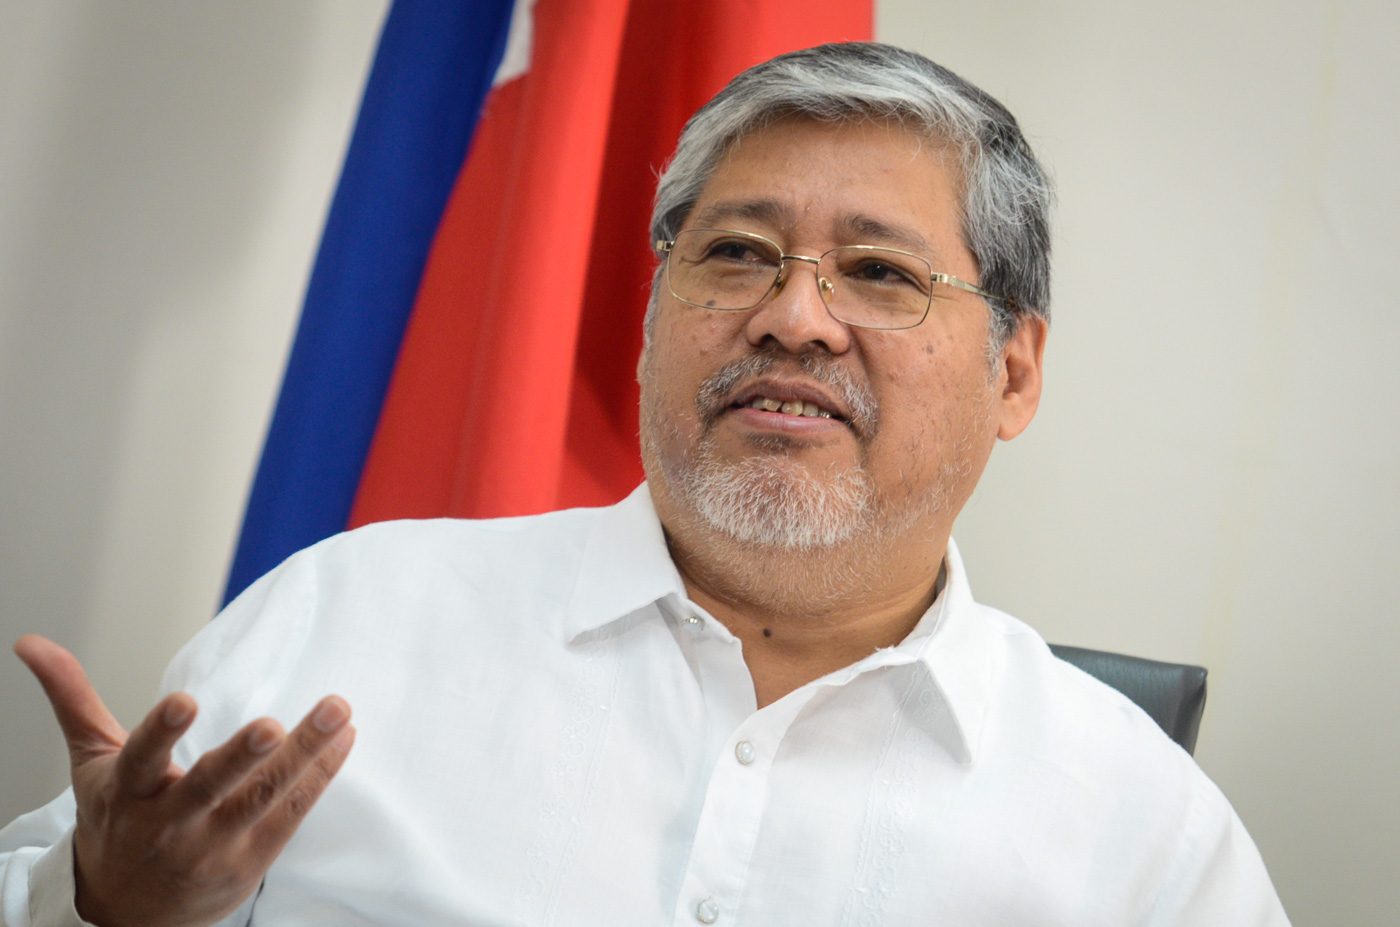 NEW LEADER. Foreign Secretary Enrique Manalo heads the Department of Foreign Affairs after his predecessor, Perfecto Yasay Jr, was rejected by lawmakers. Photo by LeAnne Jazul/Rappler
 